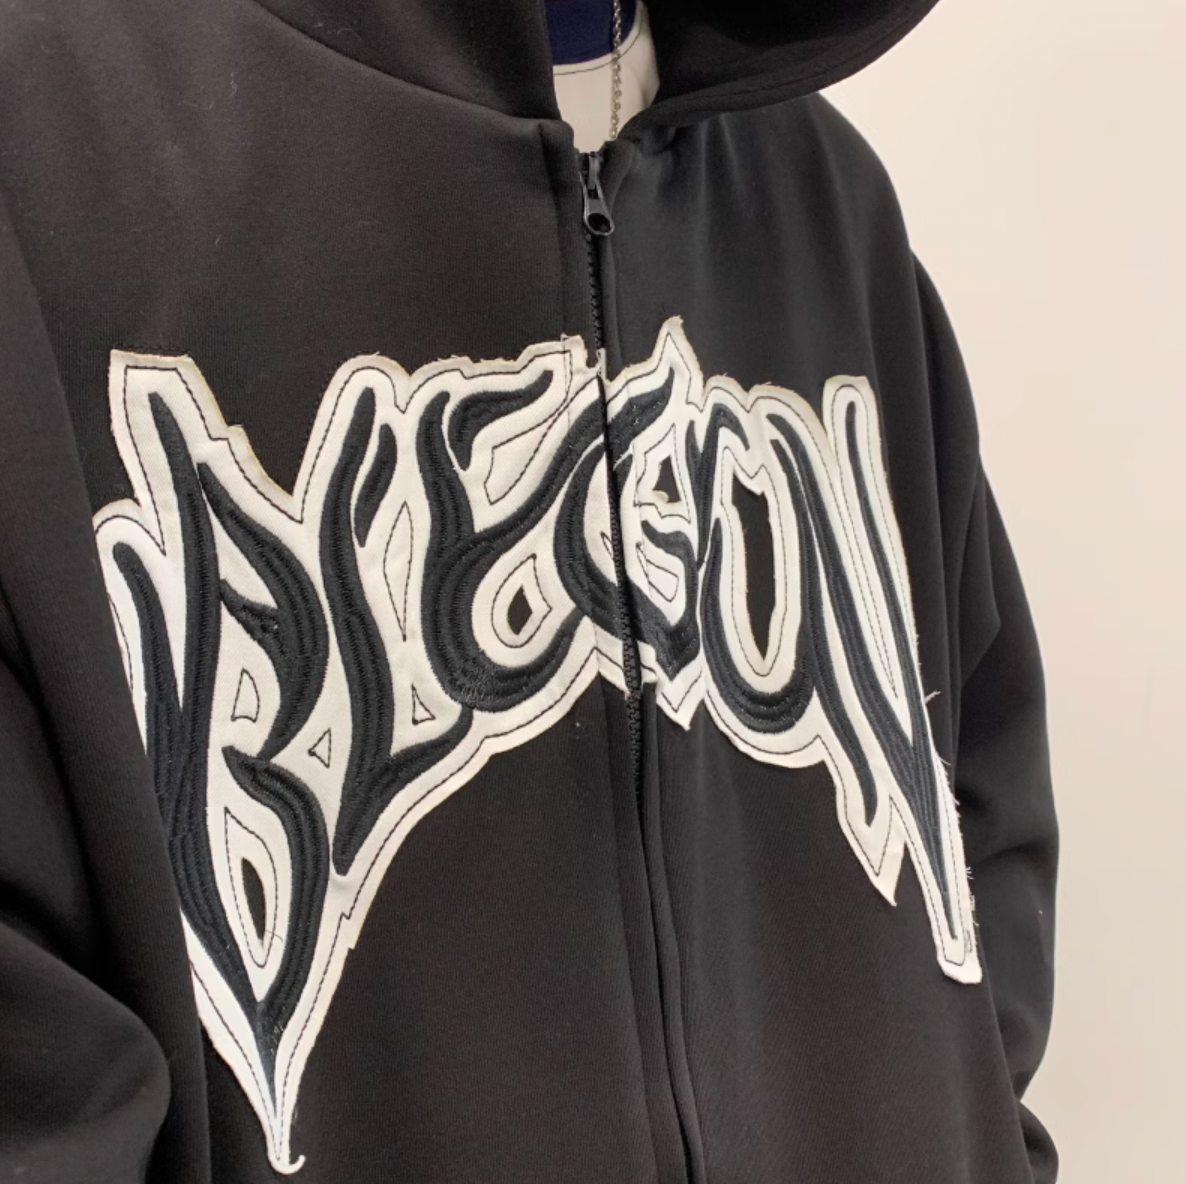 F3F Select Embroidery Zip Up Hoodie